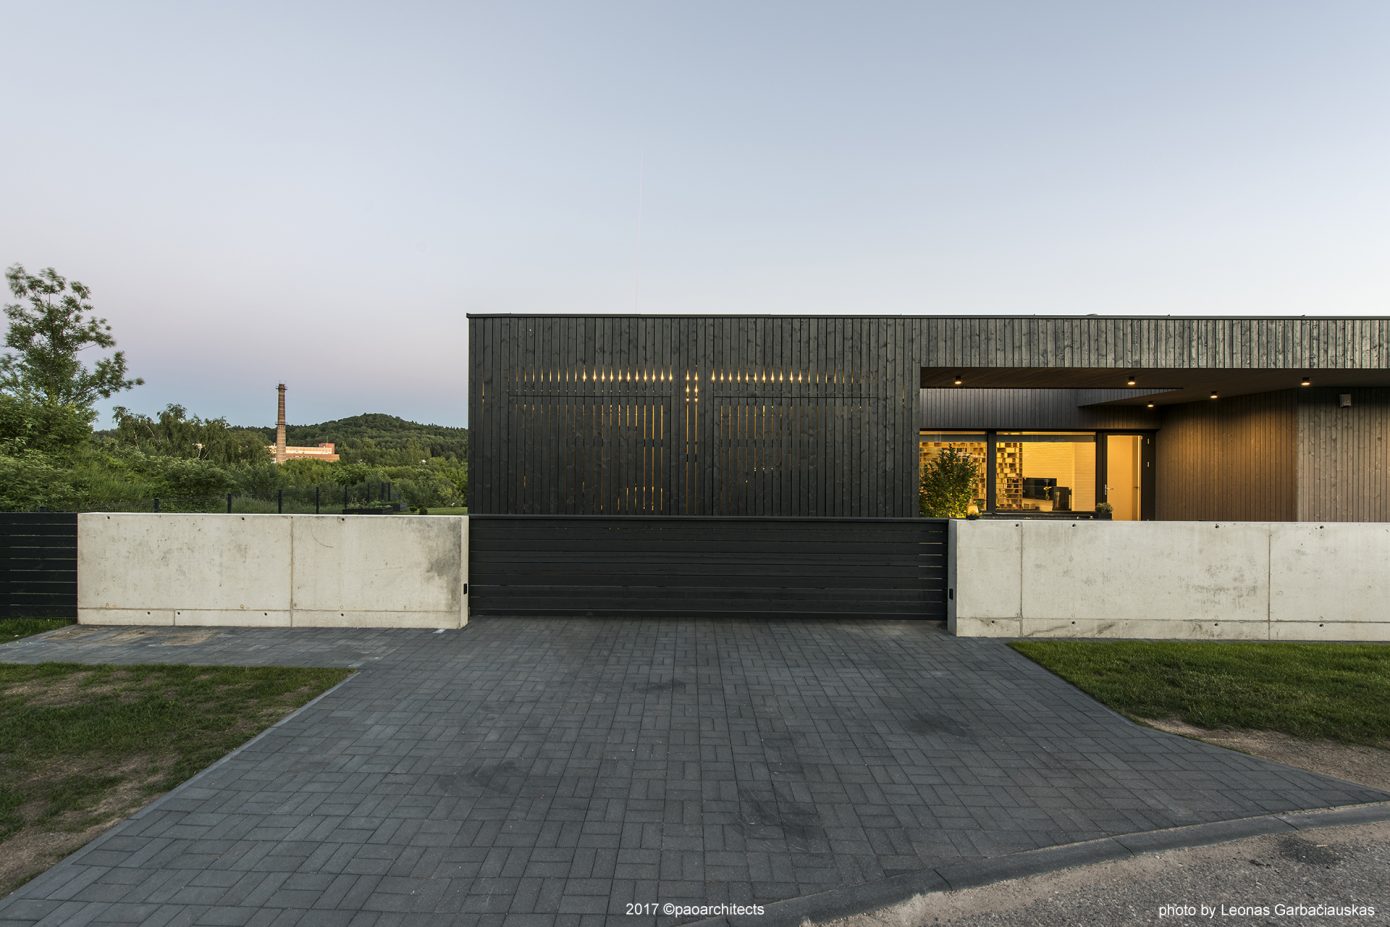 The Black Box House by Pao Architects